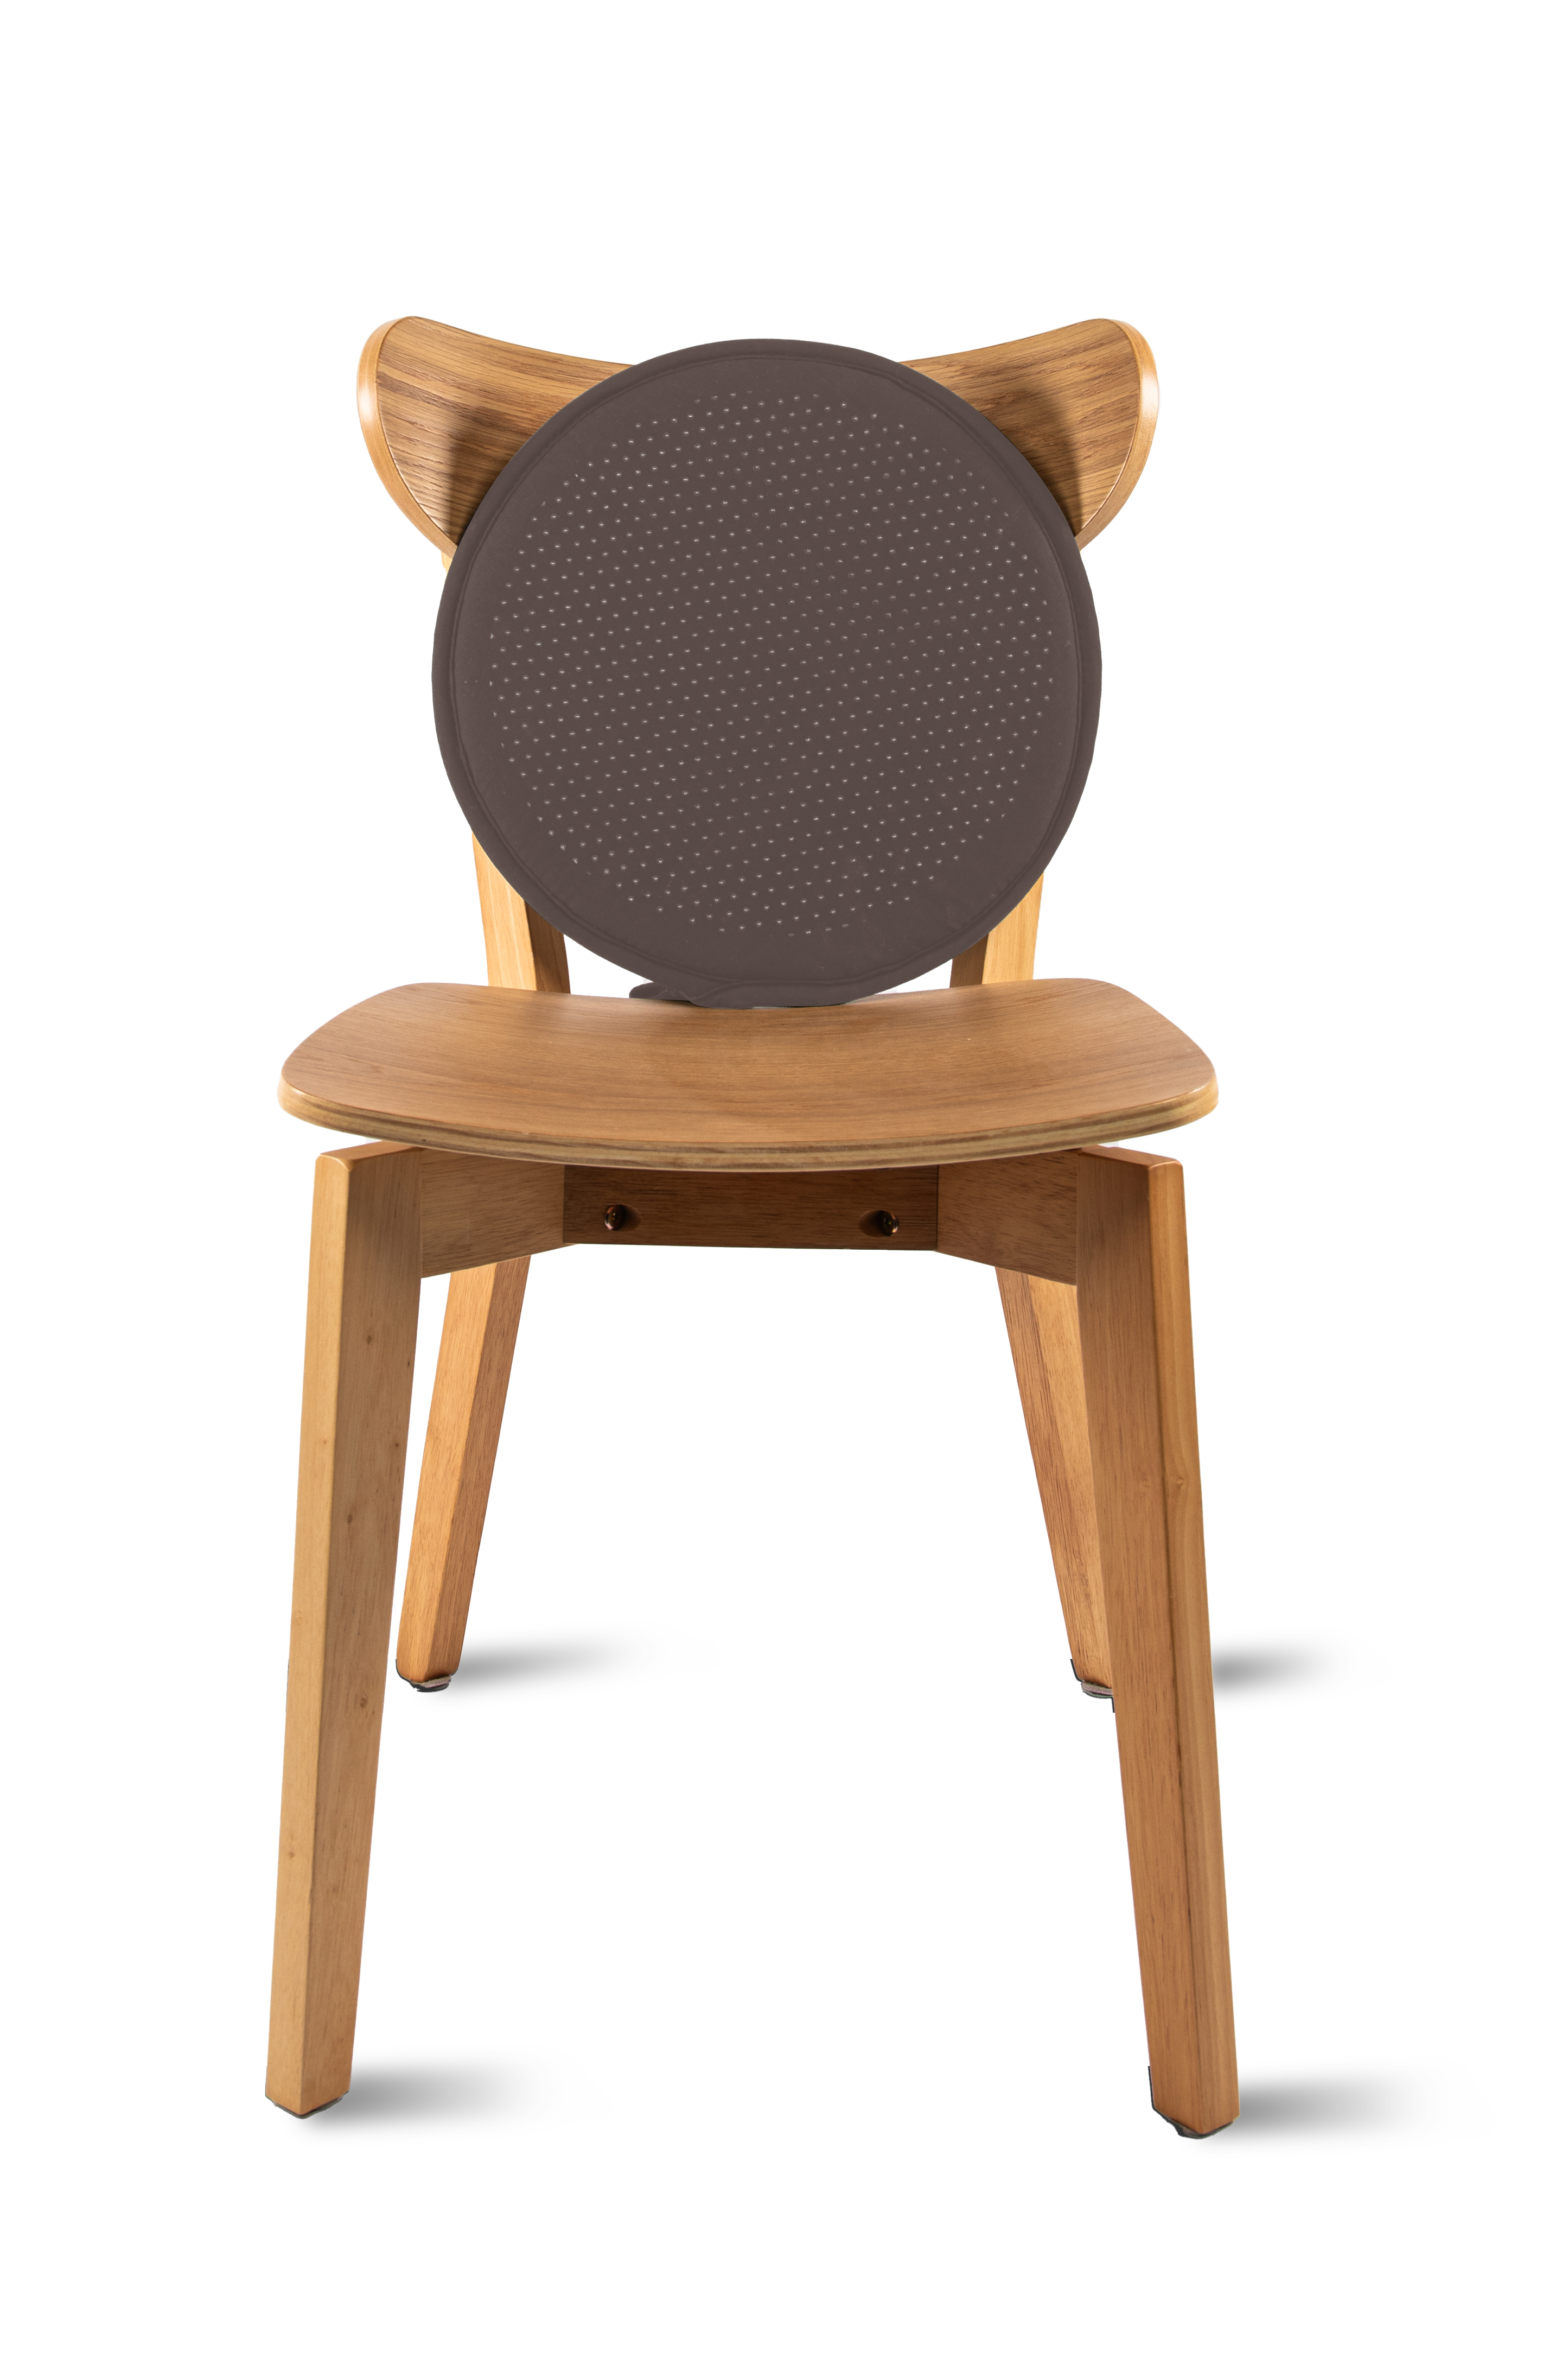 Chairpad SUAVE dia 37cm, brown